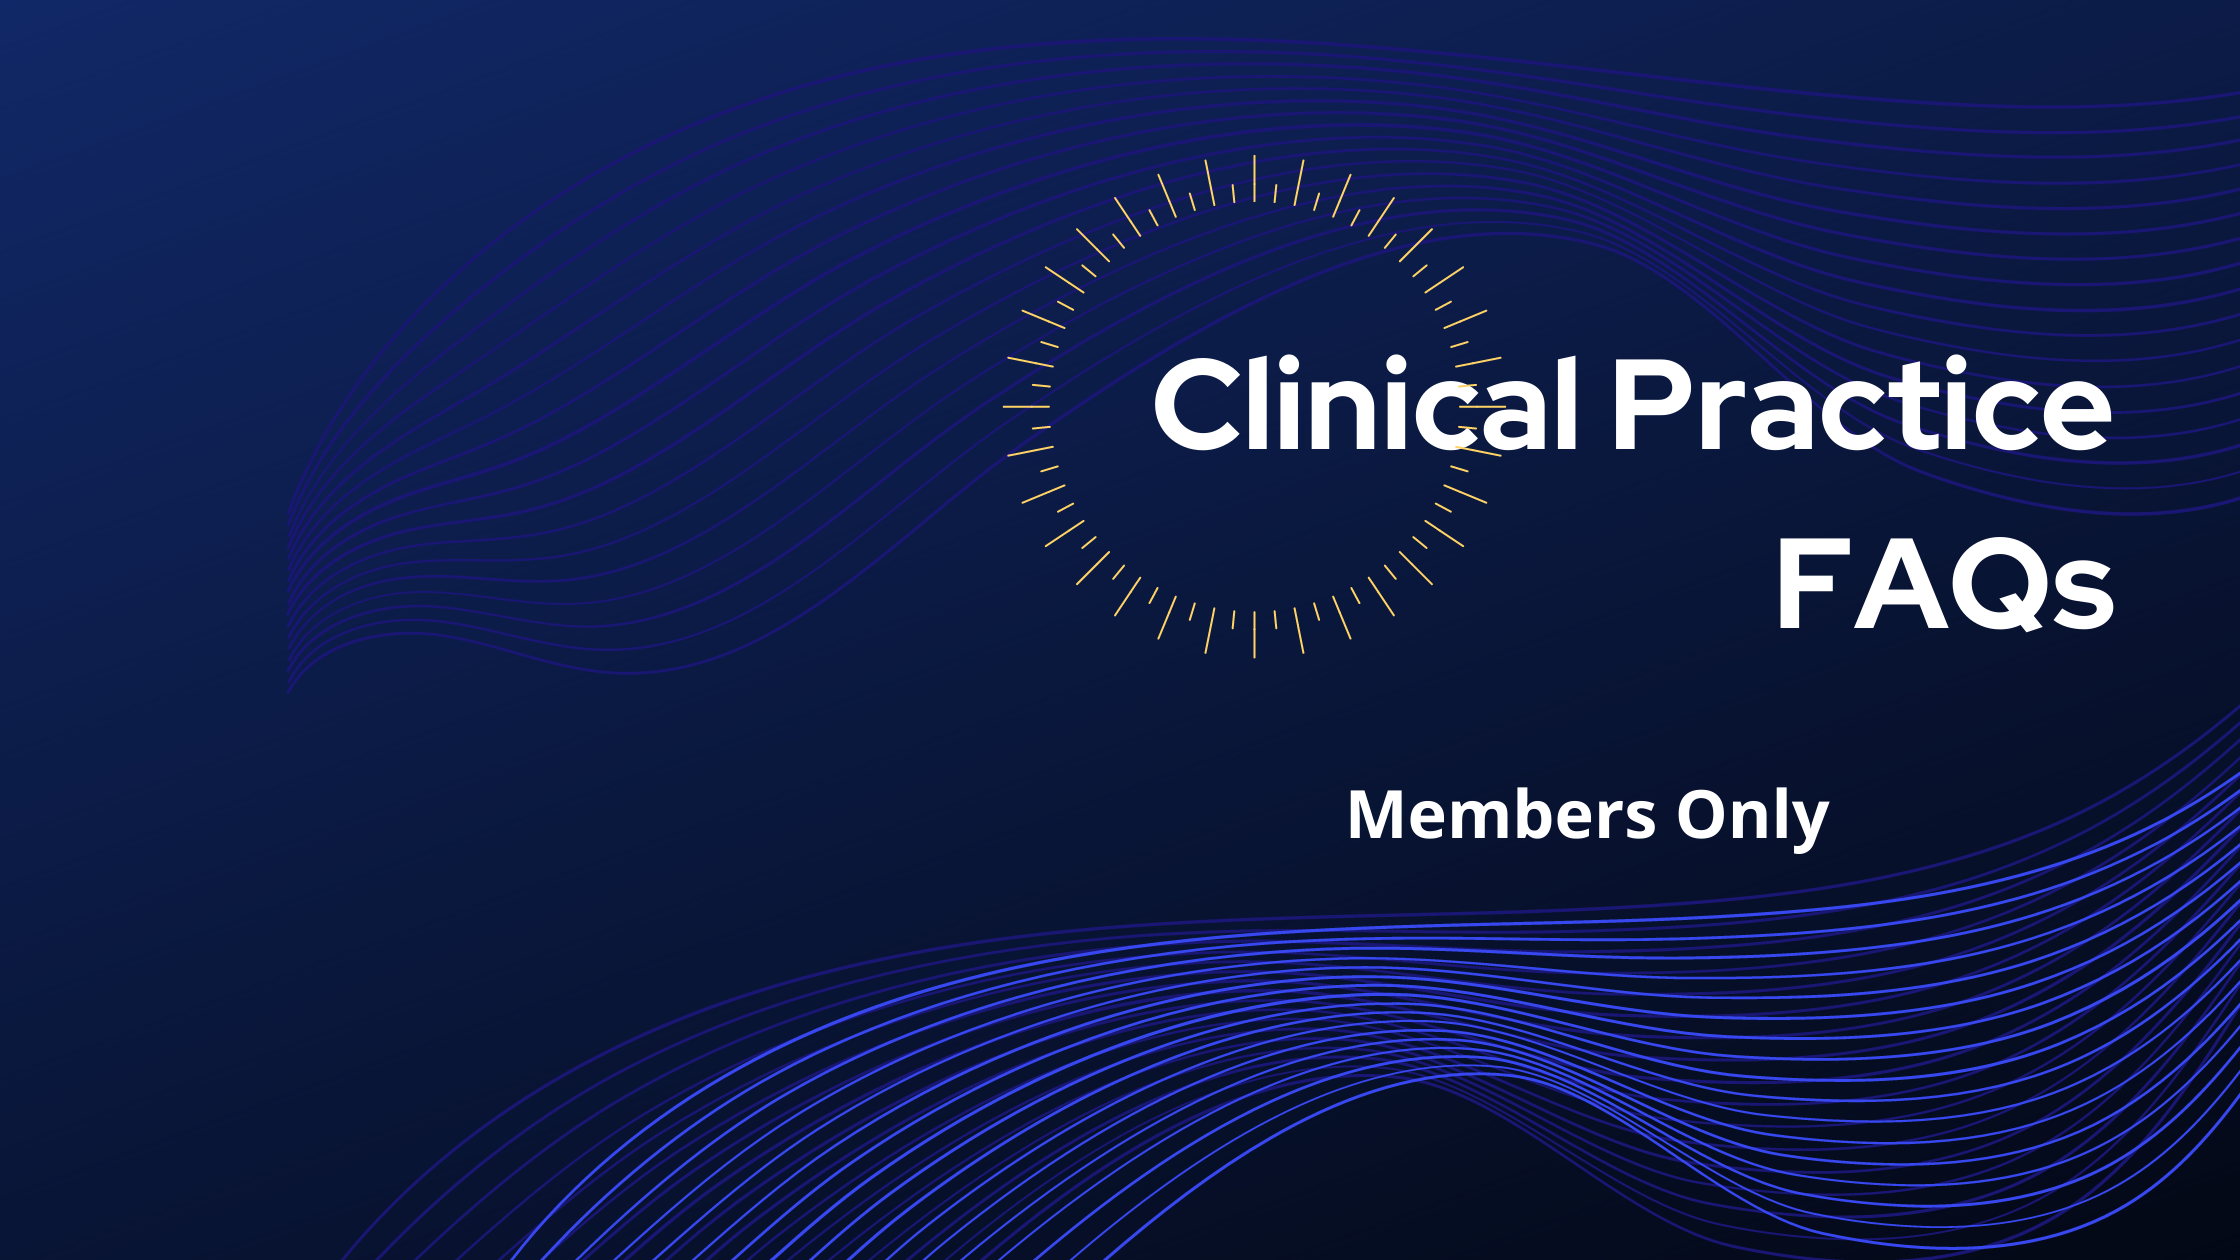 Clinical Practice FAQs